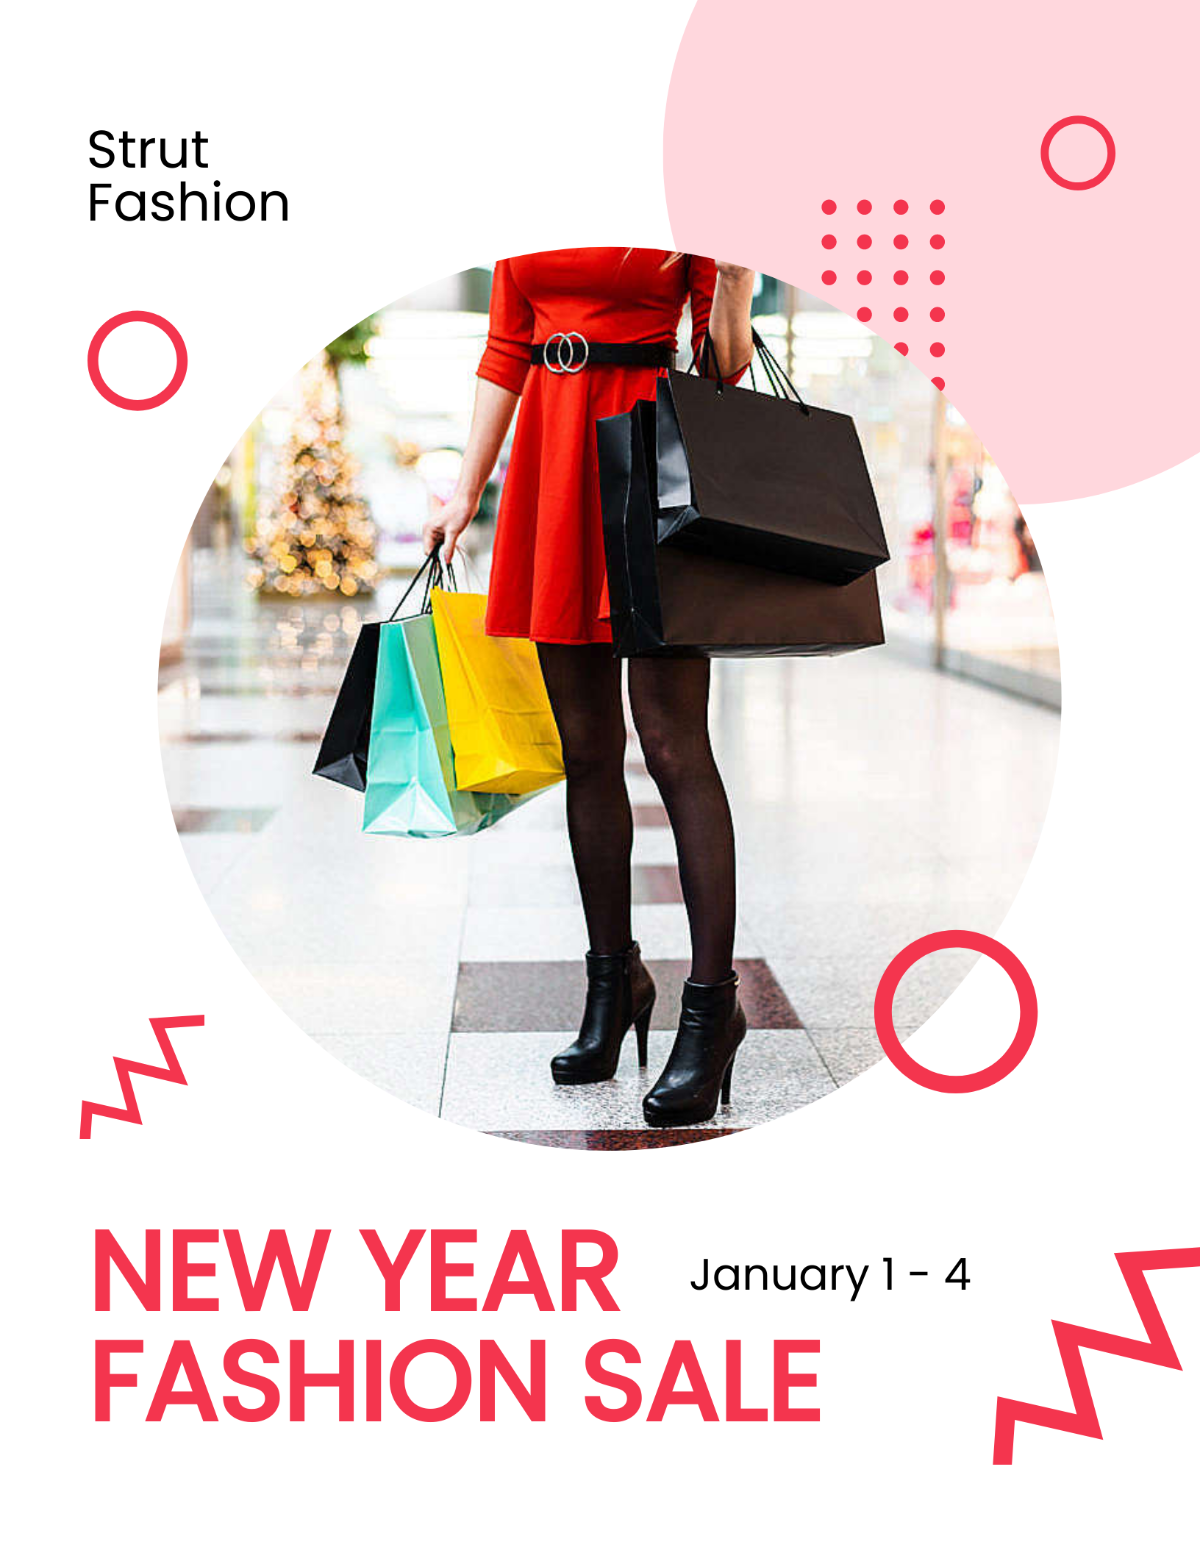 New Year Fashion Sale Promotion Flyer